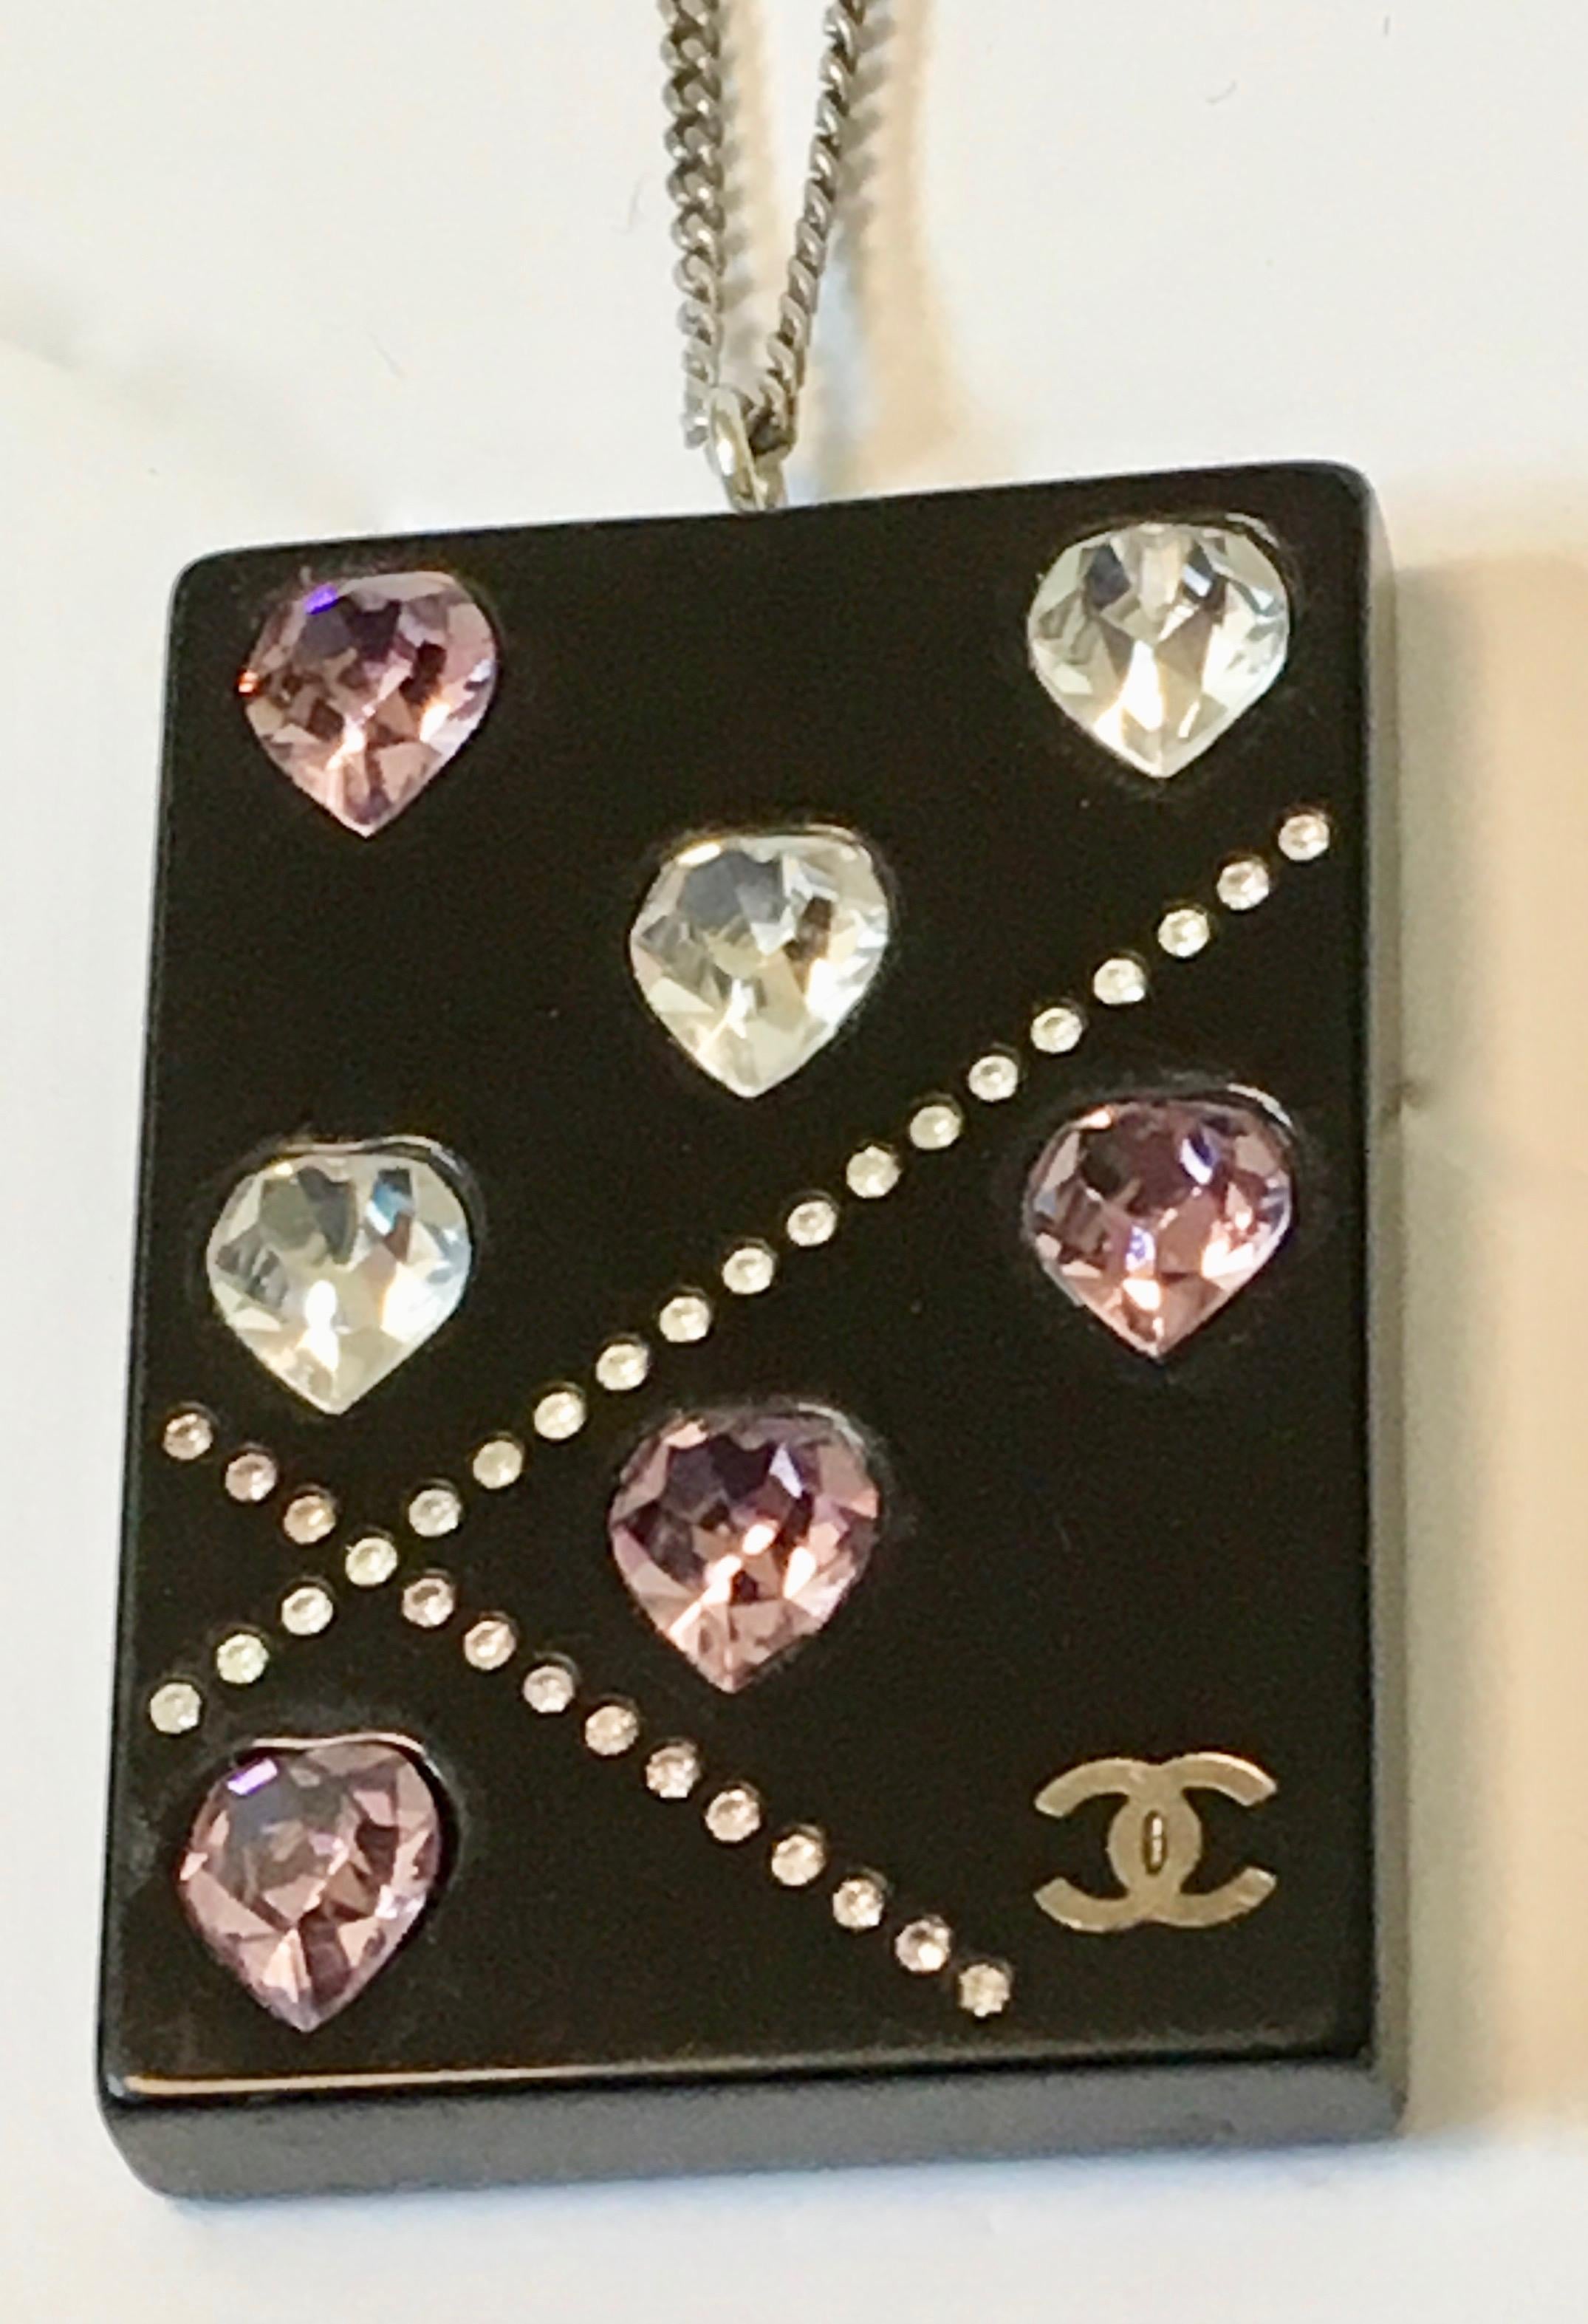 Chanel Silver Tone Black Lucite Necklace with Encrusted Crystals  In Excellent Condition For Sale In Boca Raton, FL